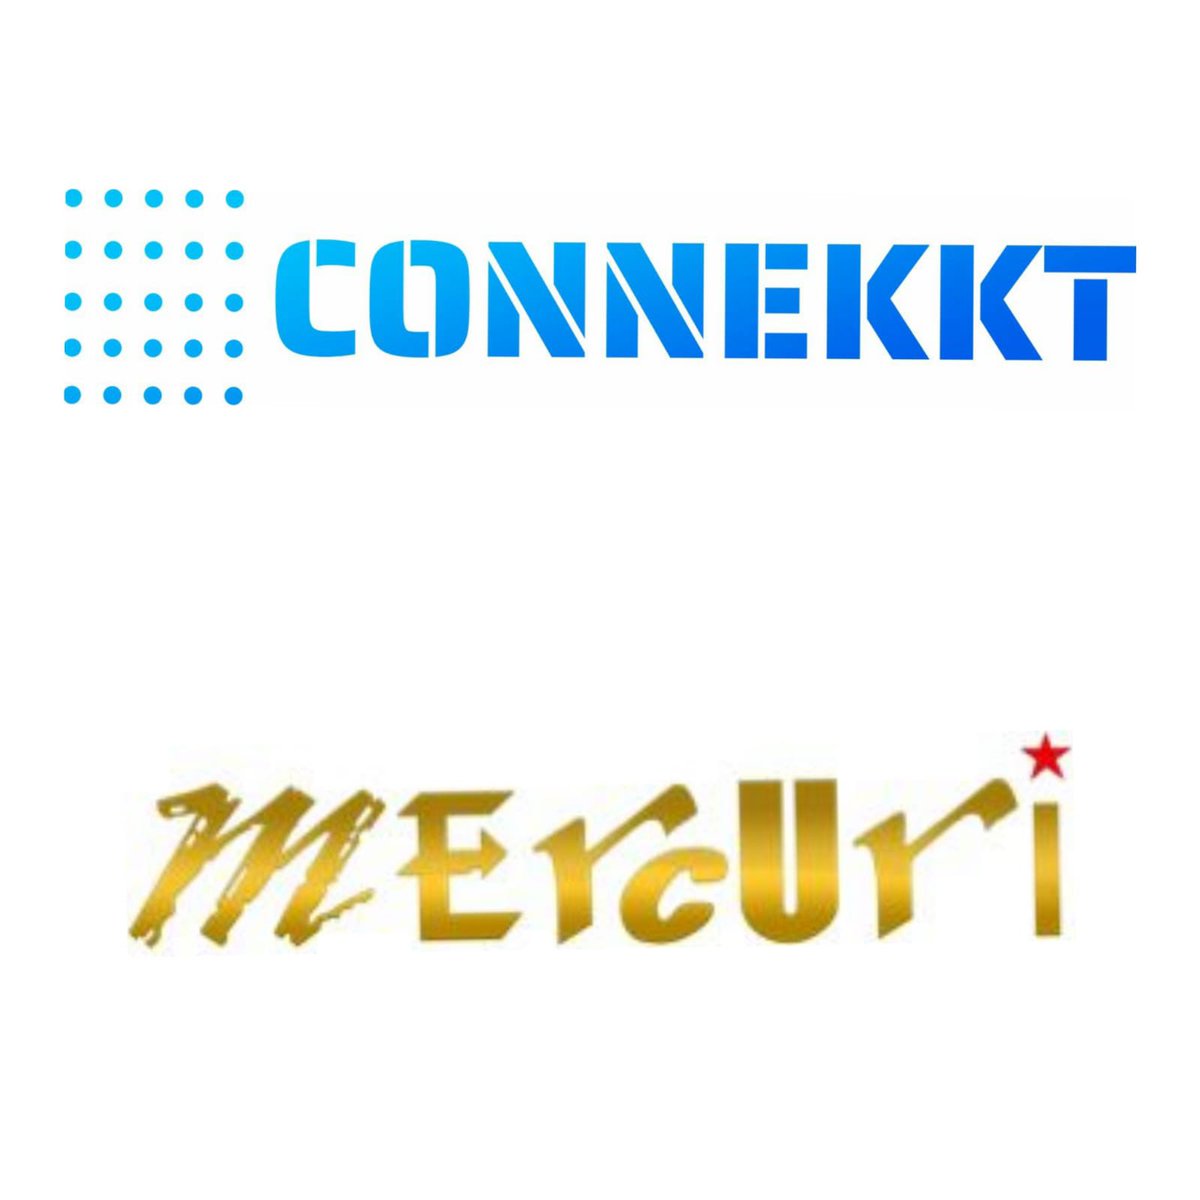 CONNEKKT MEDIA - MERCURI GROUP COLLABORATE FOR MULTIPLE MEGA-BUDGET FILMS… ILAIYARAAJA BIOPIC TO BE FIRST, DHANUSH TO ESSAY THE ROLE… Connekkt Media and Mercuri are collaborating for multiple films, which will be made over a period of three years. The first film will be the